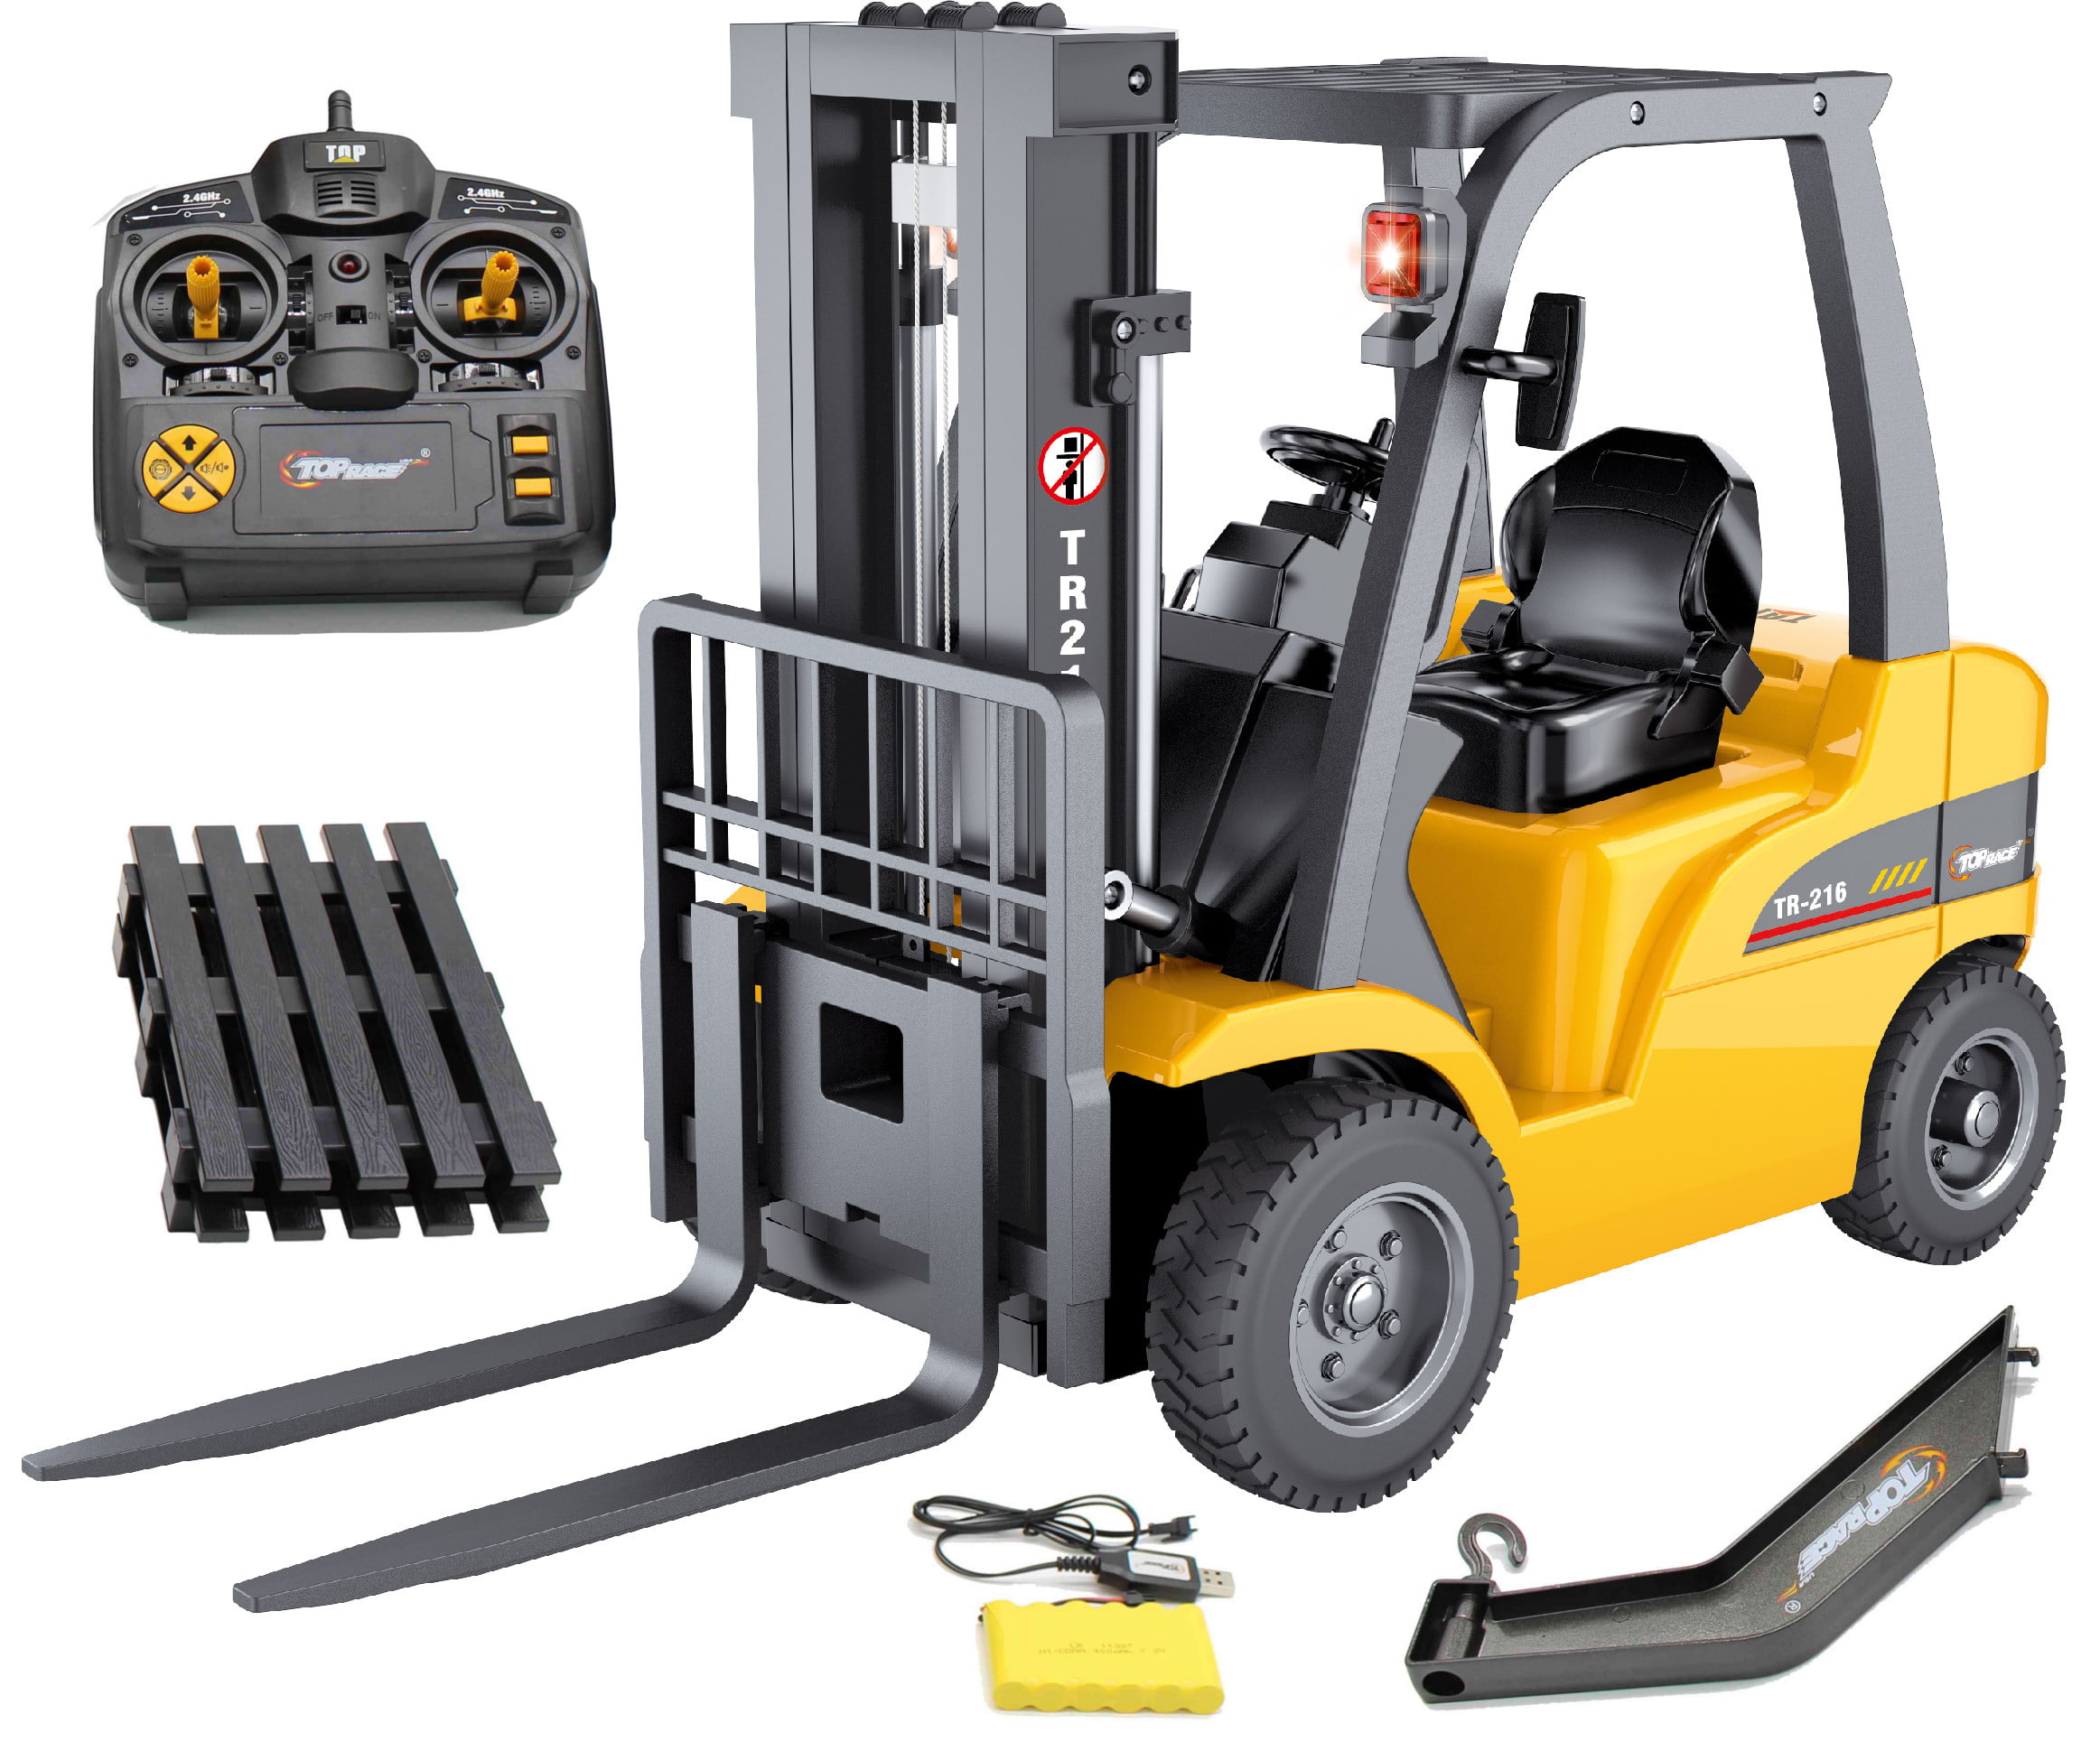 Top Race JUMBO Remote control forklift 13 Inch Tall, 8 Channel Full  Functional Professional RC Forklift Construction Toys, High Powered Motors,  1:10 Scale - Heavy Metal - (TR-216) - Walmart.com